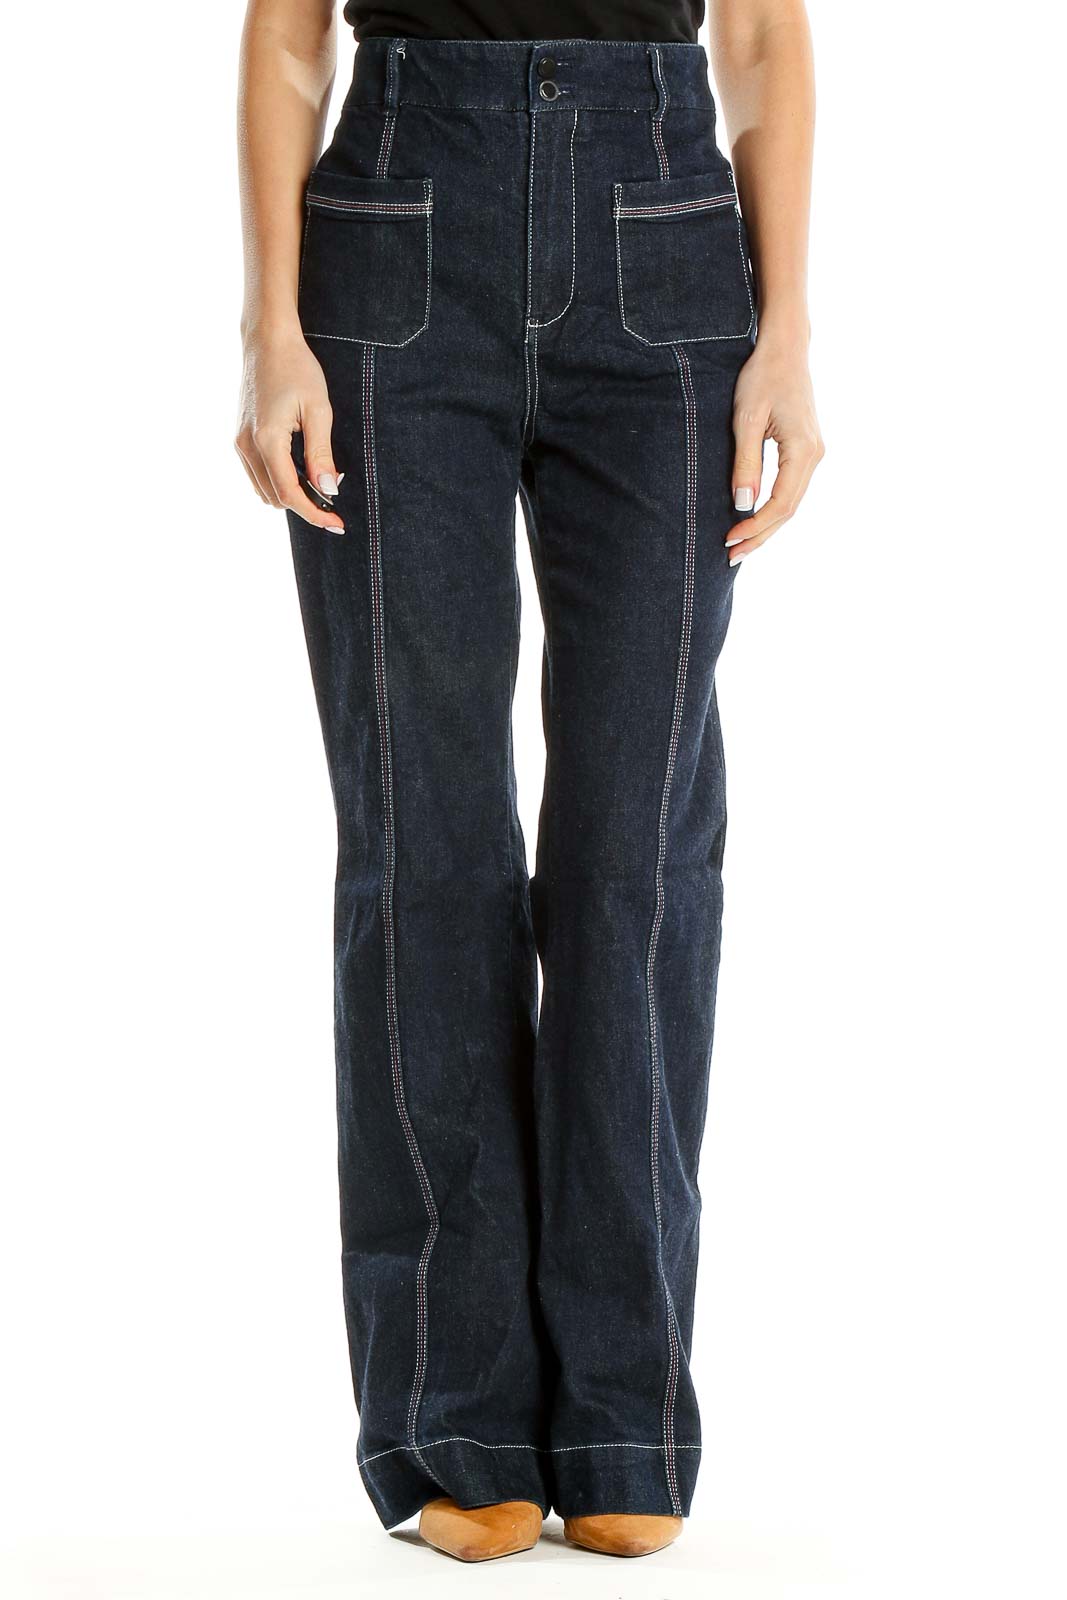 Blue Dark Wash Contrast-Stitch High-Waisted Bootcut Jeans Front